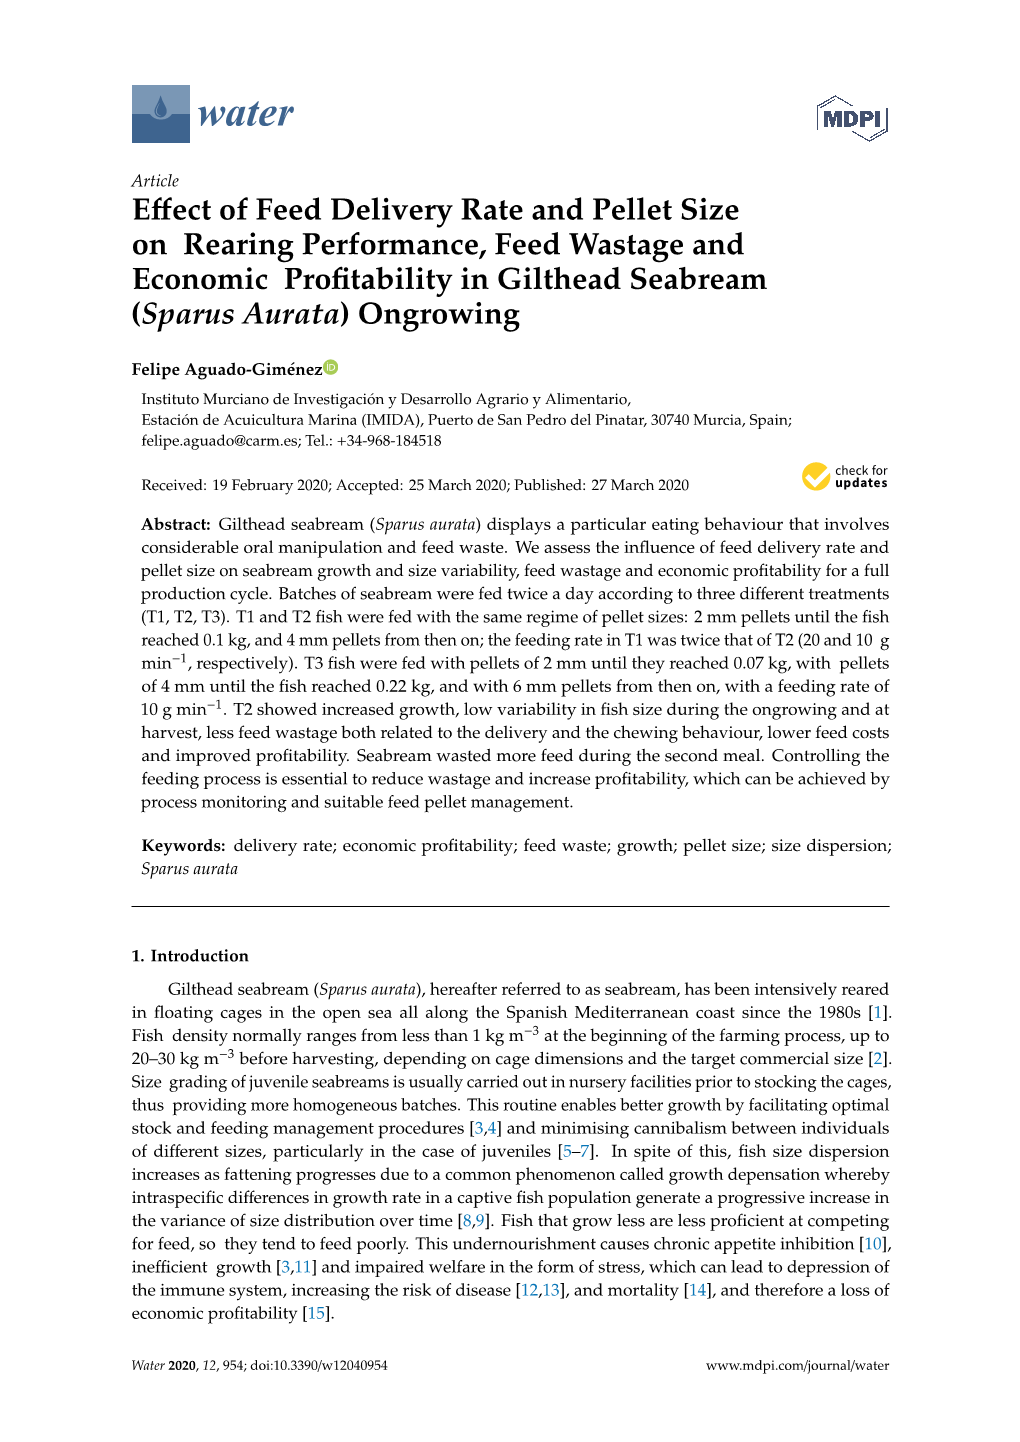 Effect of Feed Delivery Rate and Pellet Size on Rearing Performance